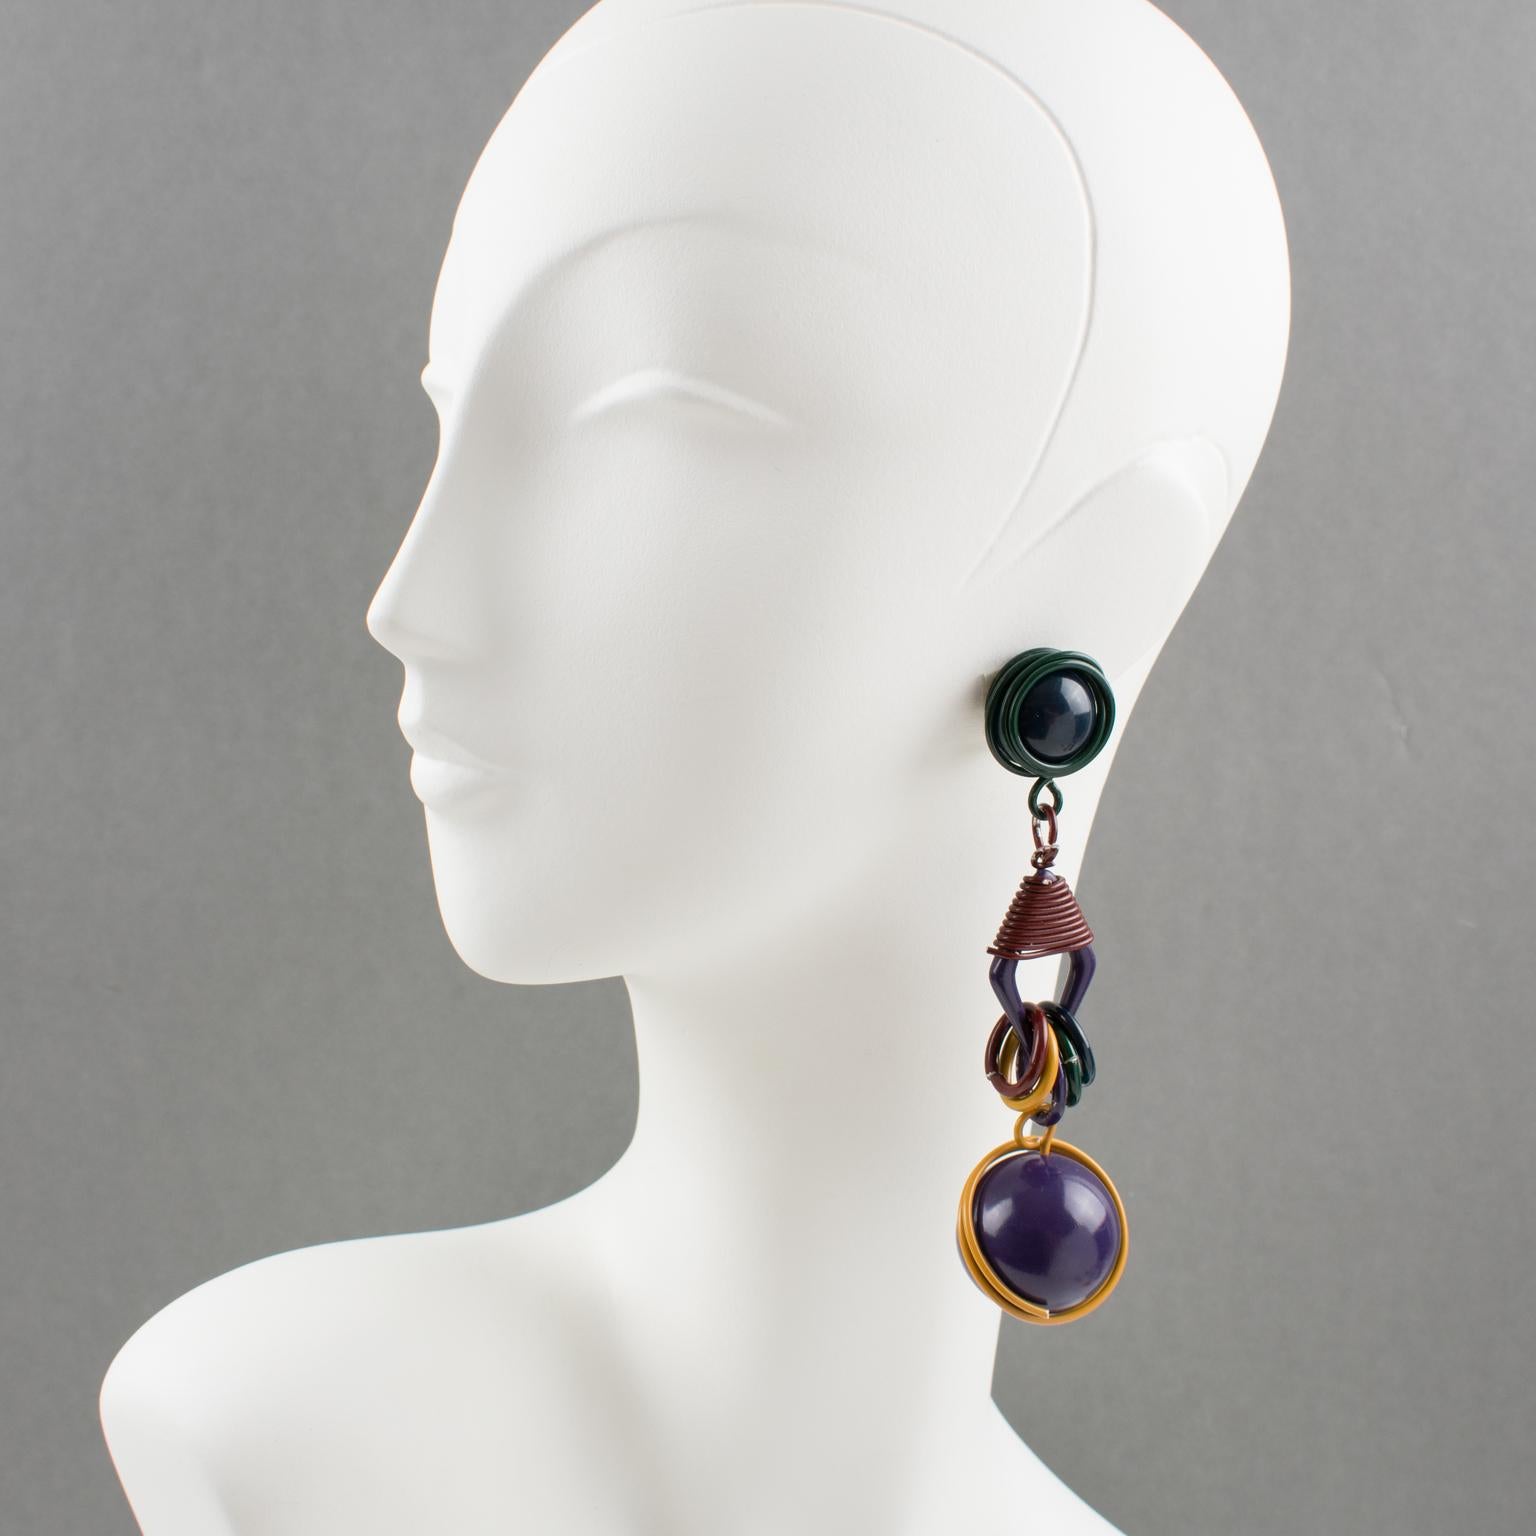 These stunning futuristic dangling clip-on earrings feature a cool Space Age 1980s design, with shoulder duster dangle articulated wired elements complimented with rings and huge beads. The multicolor enameled metal has fall colors in purple,